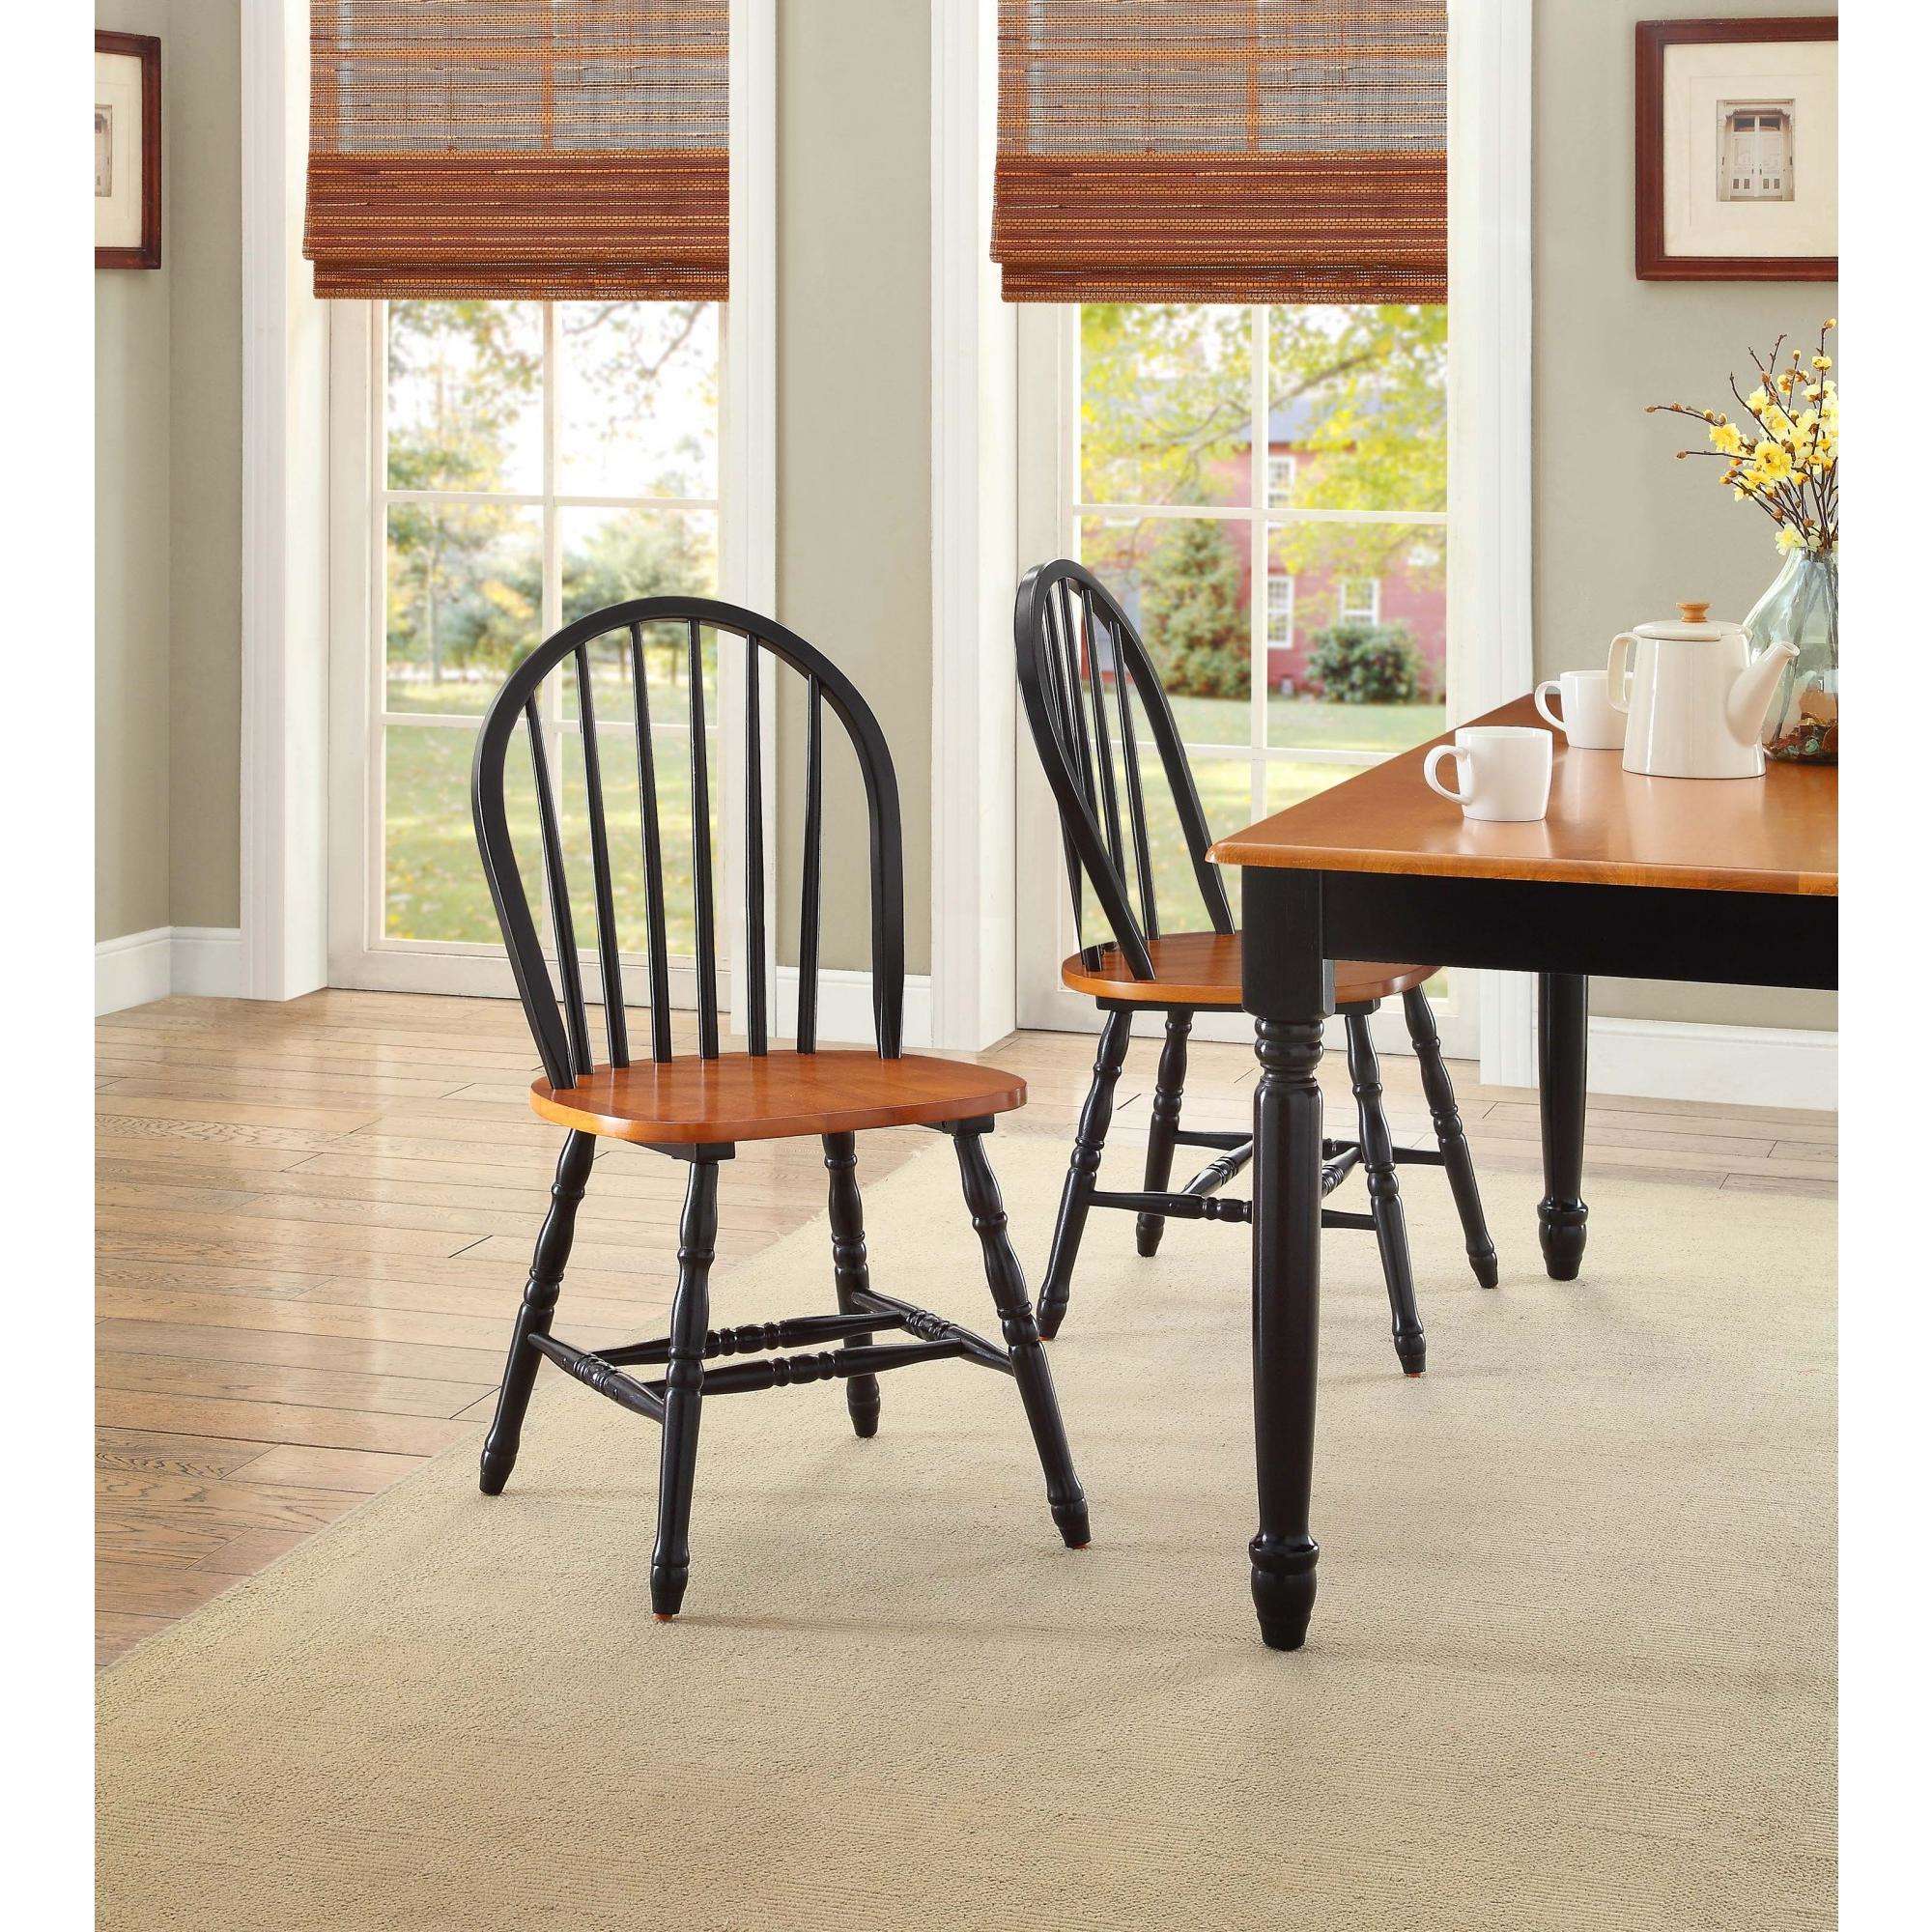 Better Homes and Gardens&amp;reg Autumn Lane 7 Piece Dining Set, Black and Oak - image 2 of 3